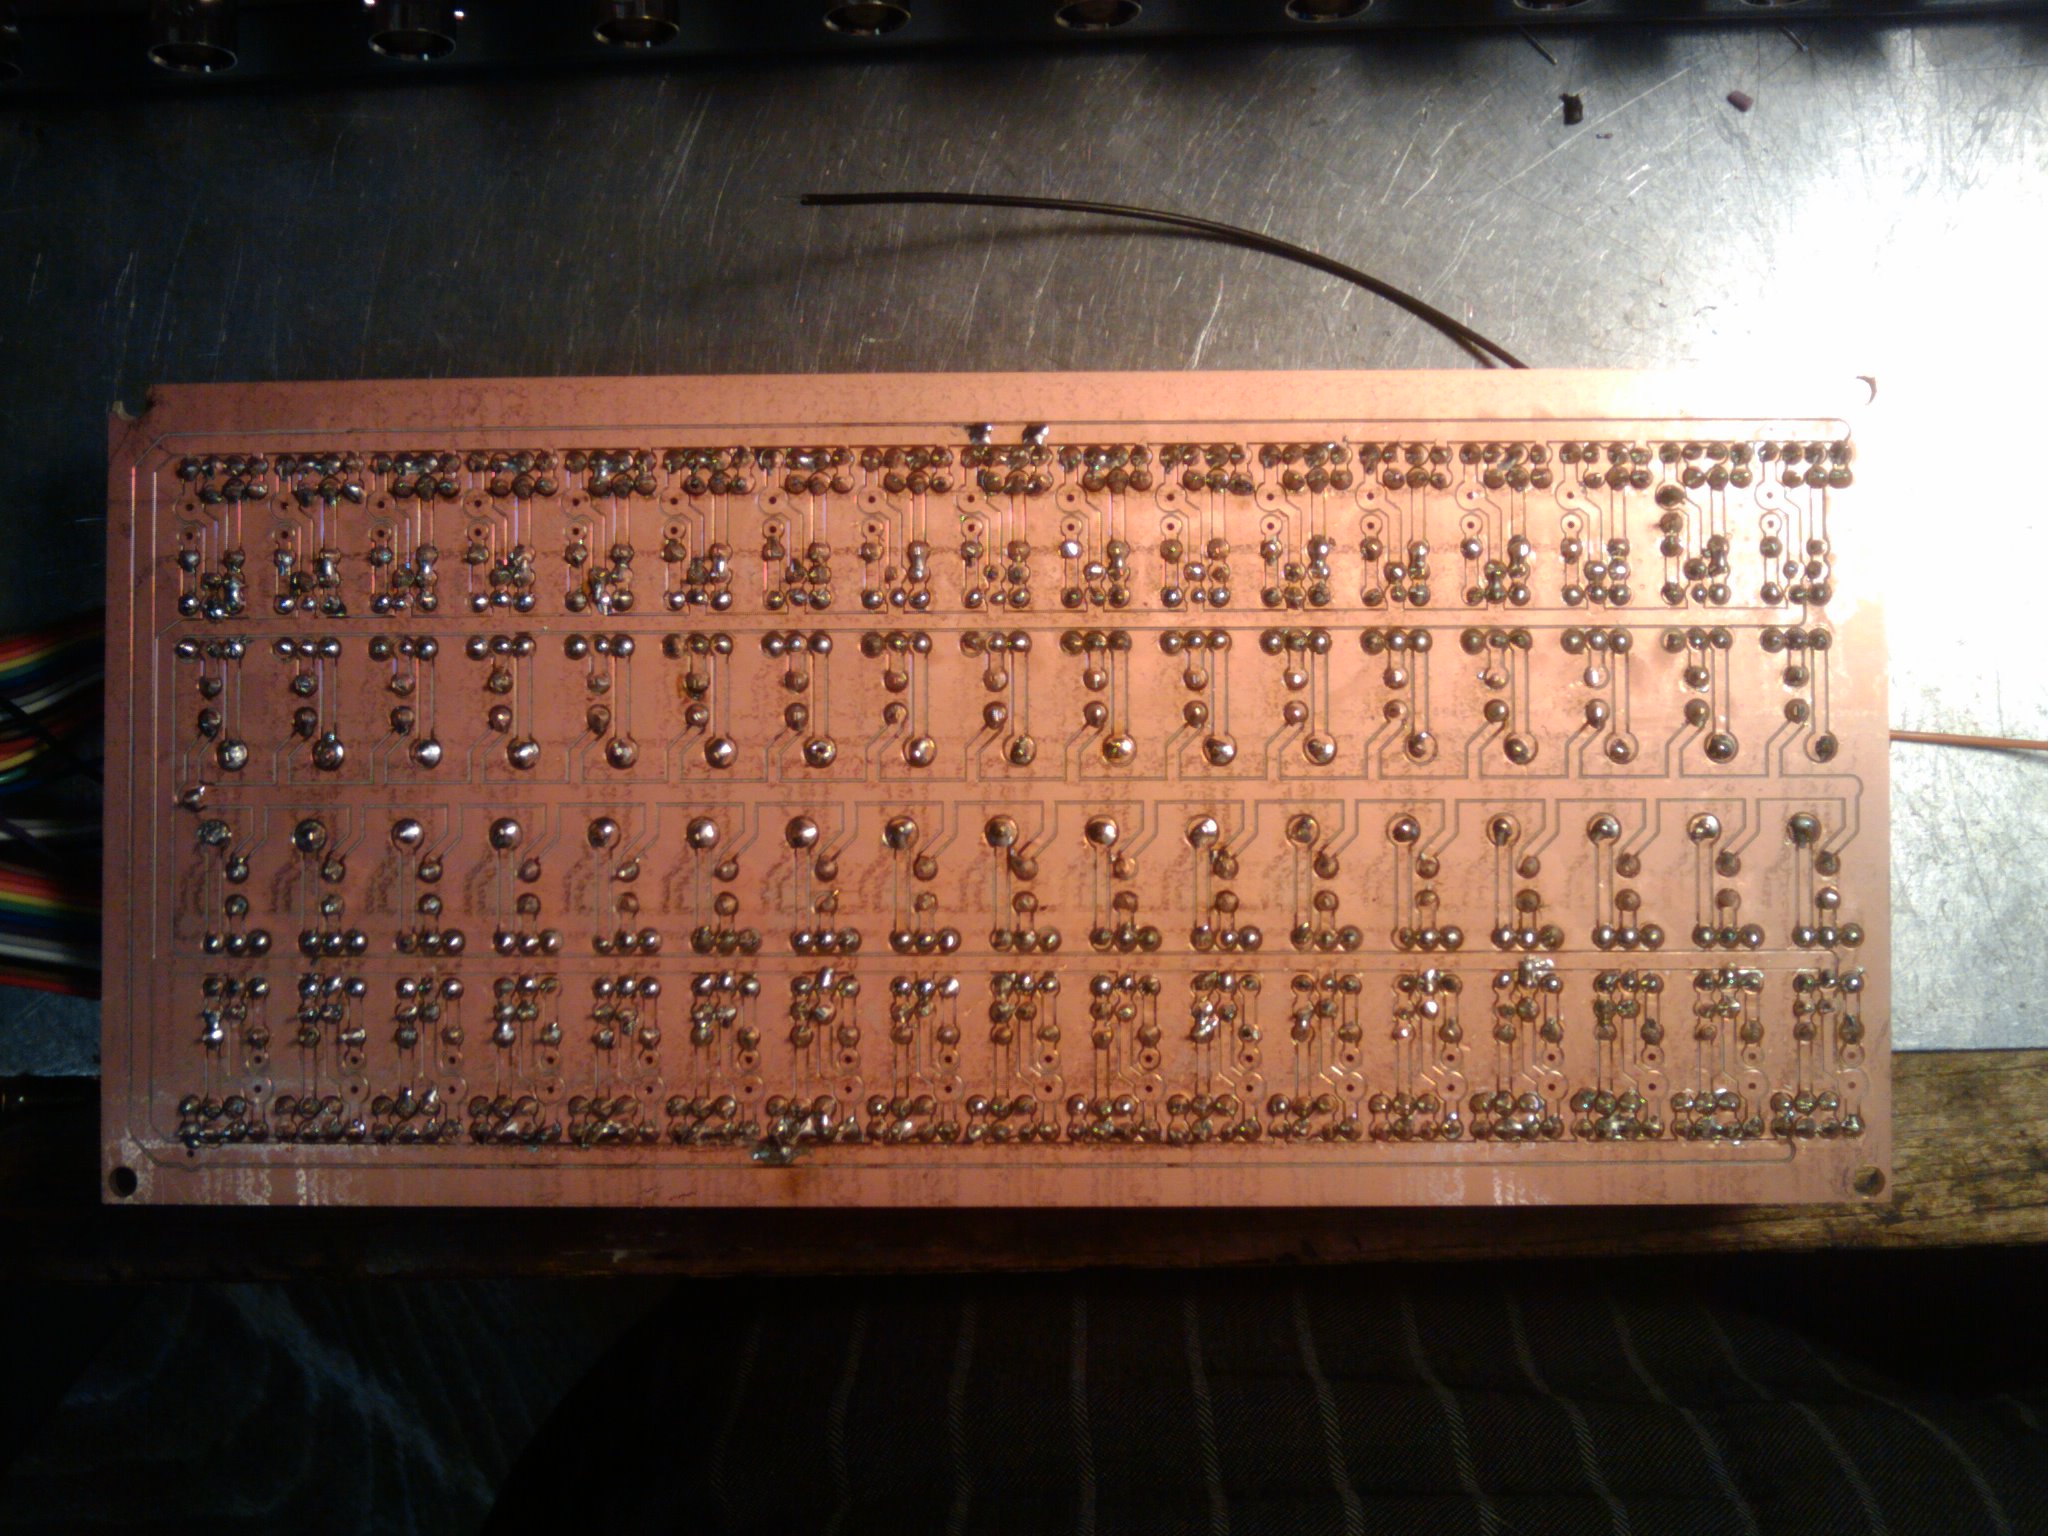 Reverse side of custom etched output stage circuit board. Opto-couplers and more provide an output stage for the ATMega1280. 